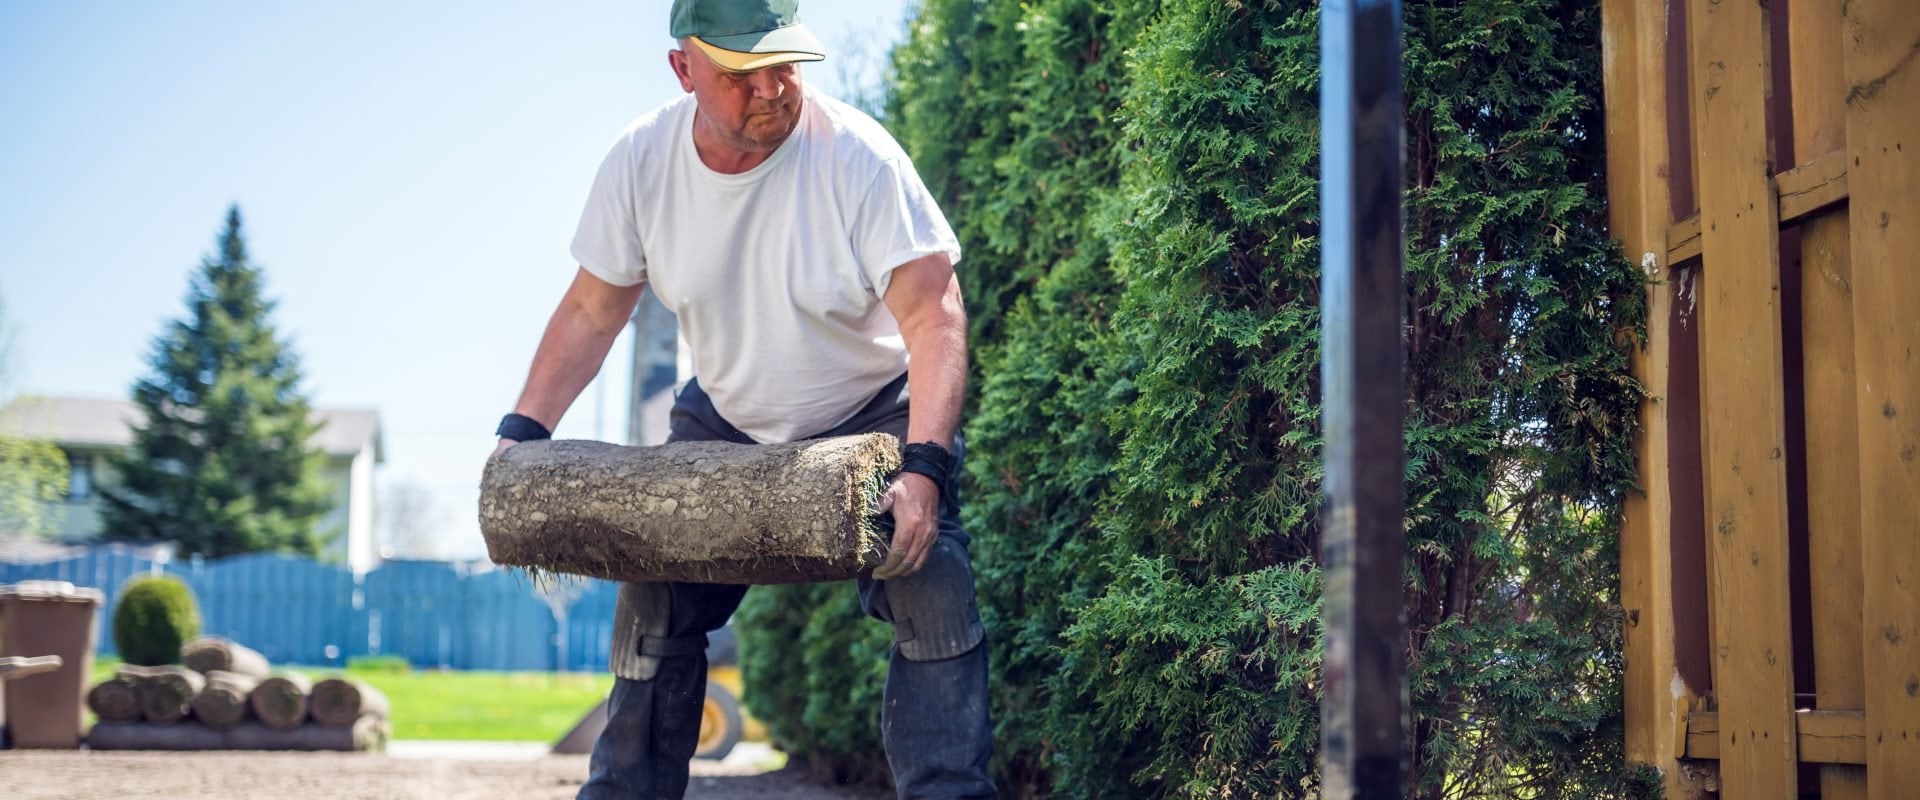 Can you get rich with a landscaping business?